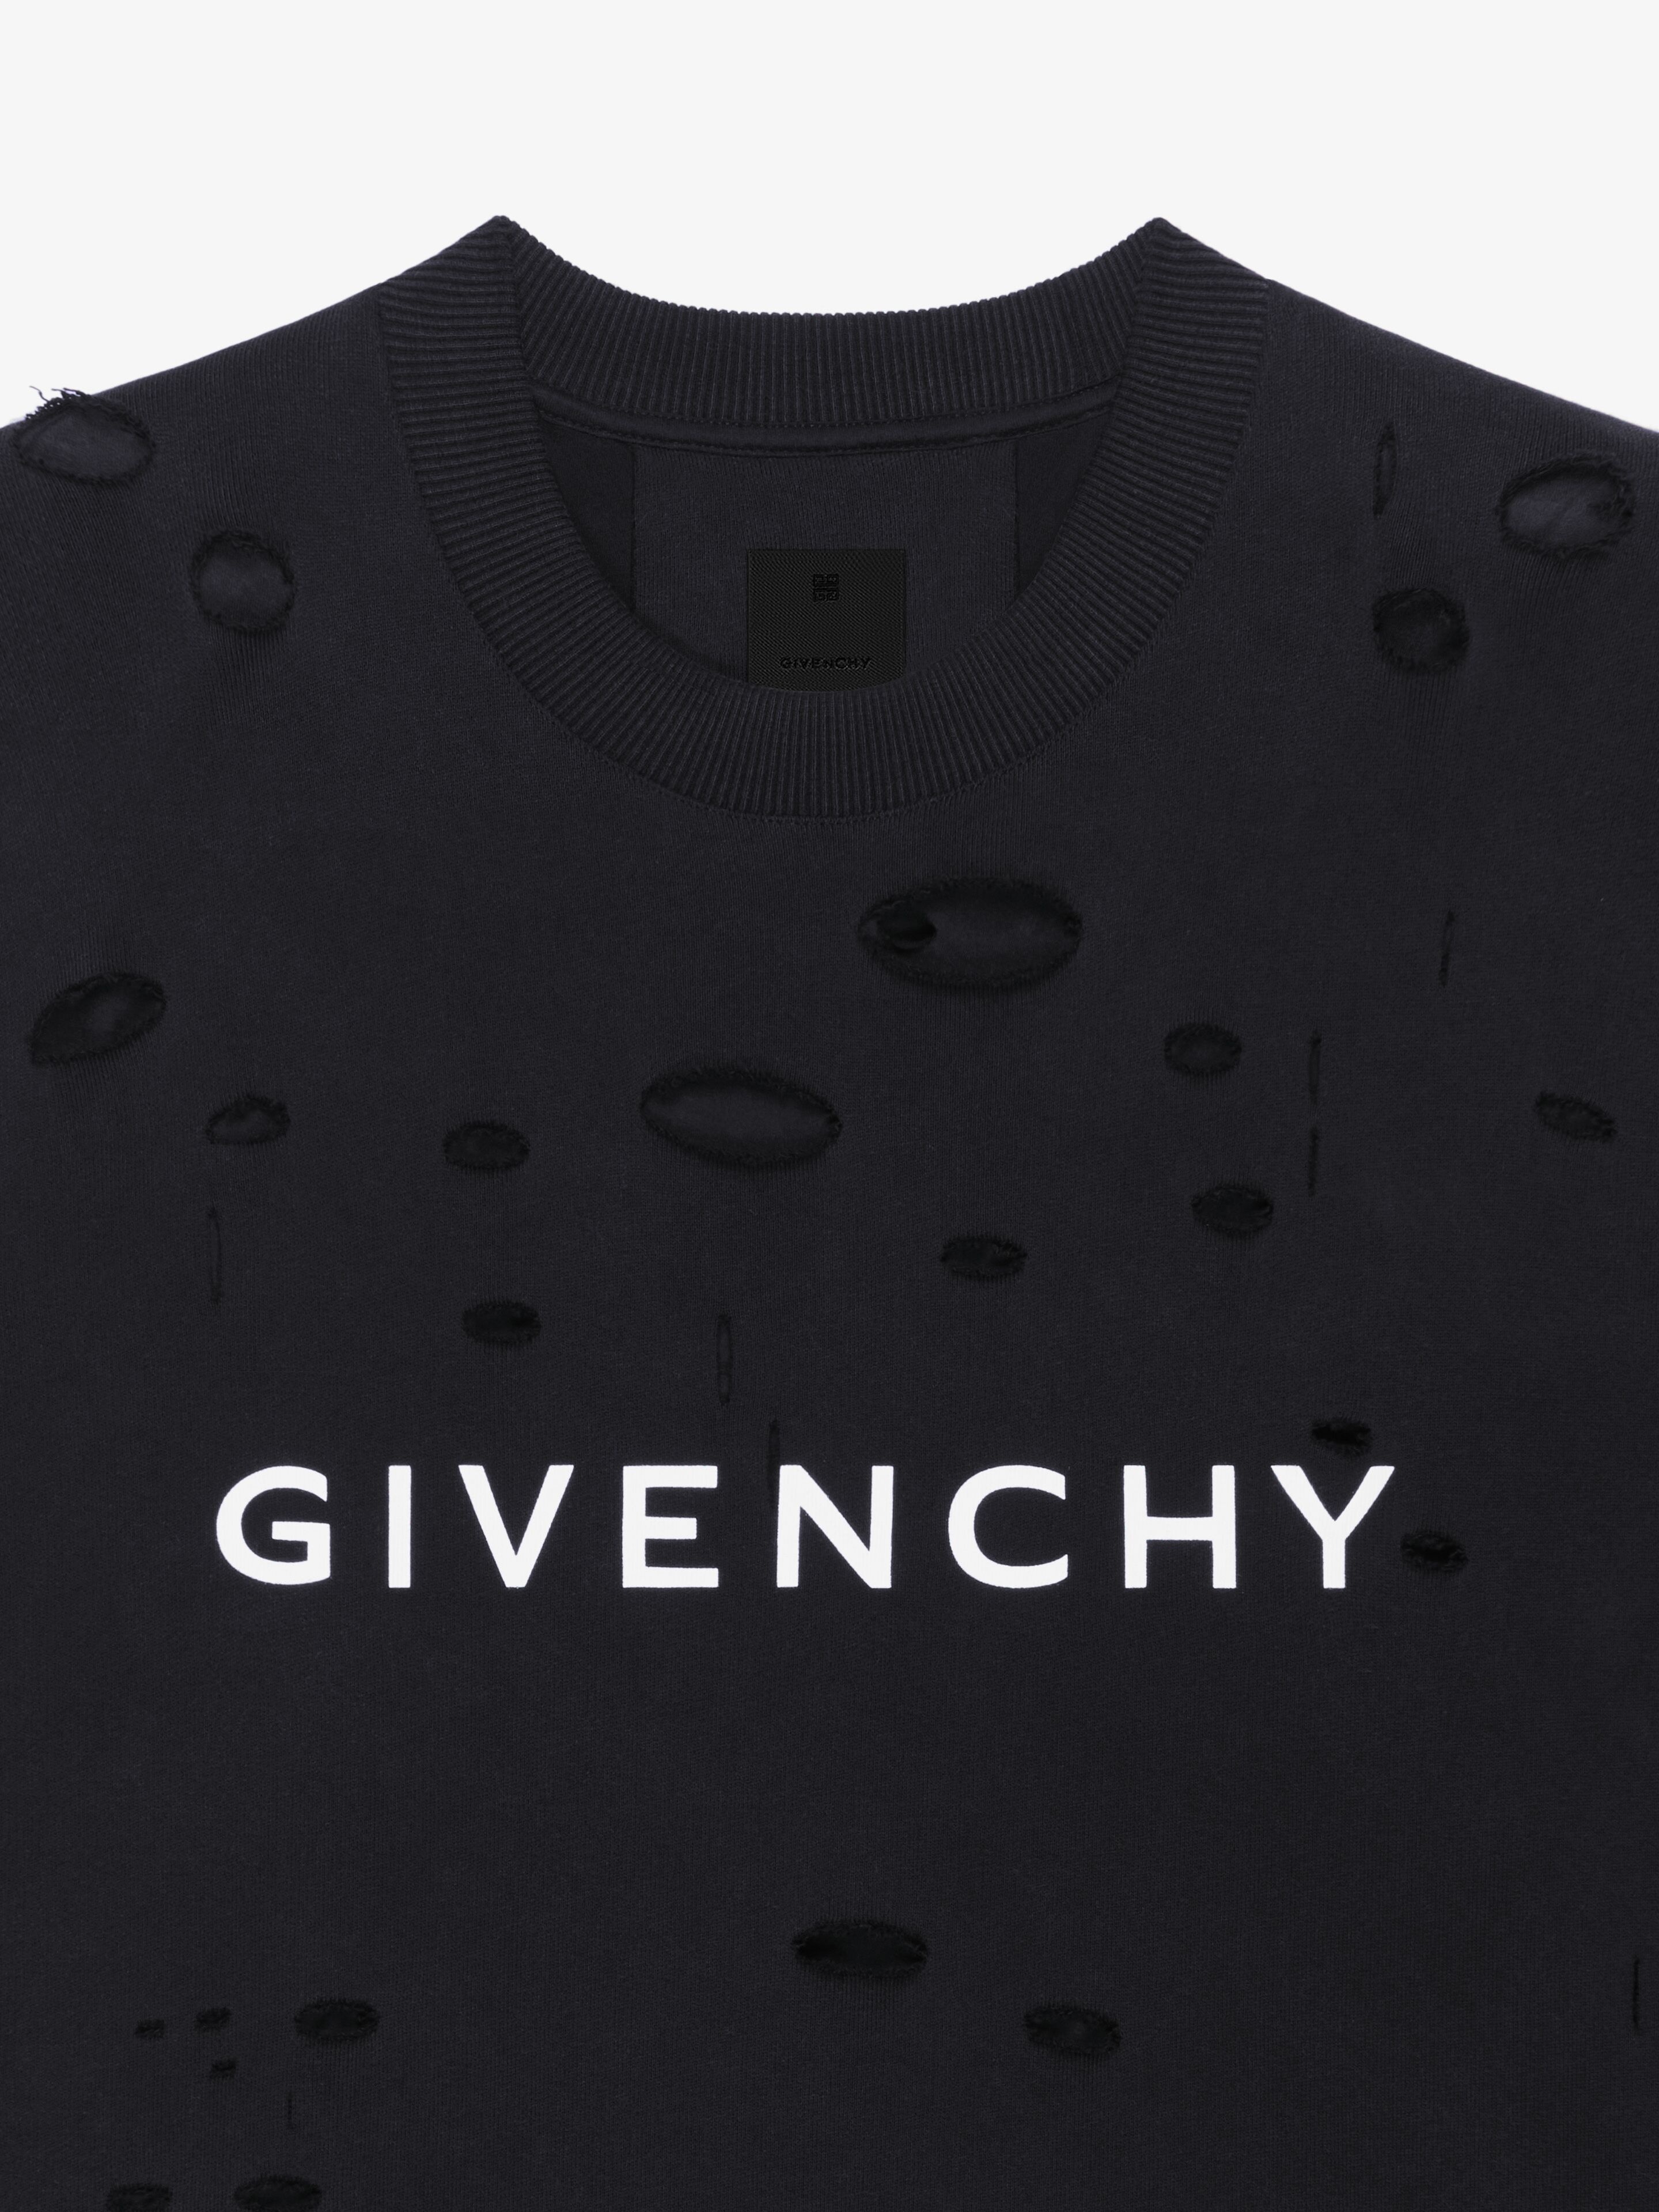 GIVENCHY ARCHETYPE SWEATSHIRT WITH DESTROYED EFFECT - 5